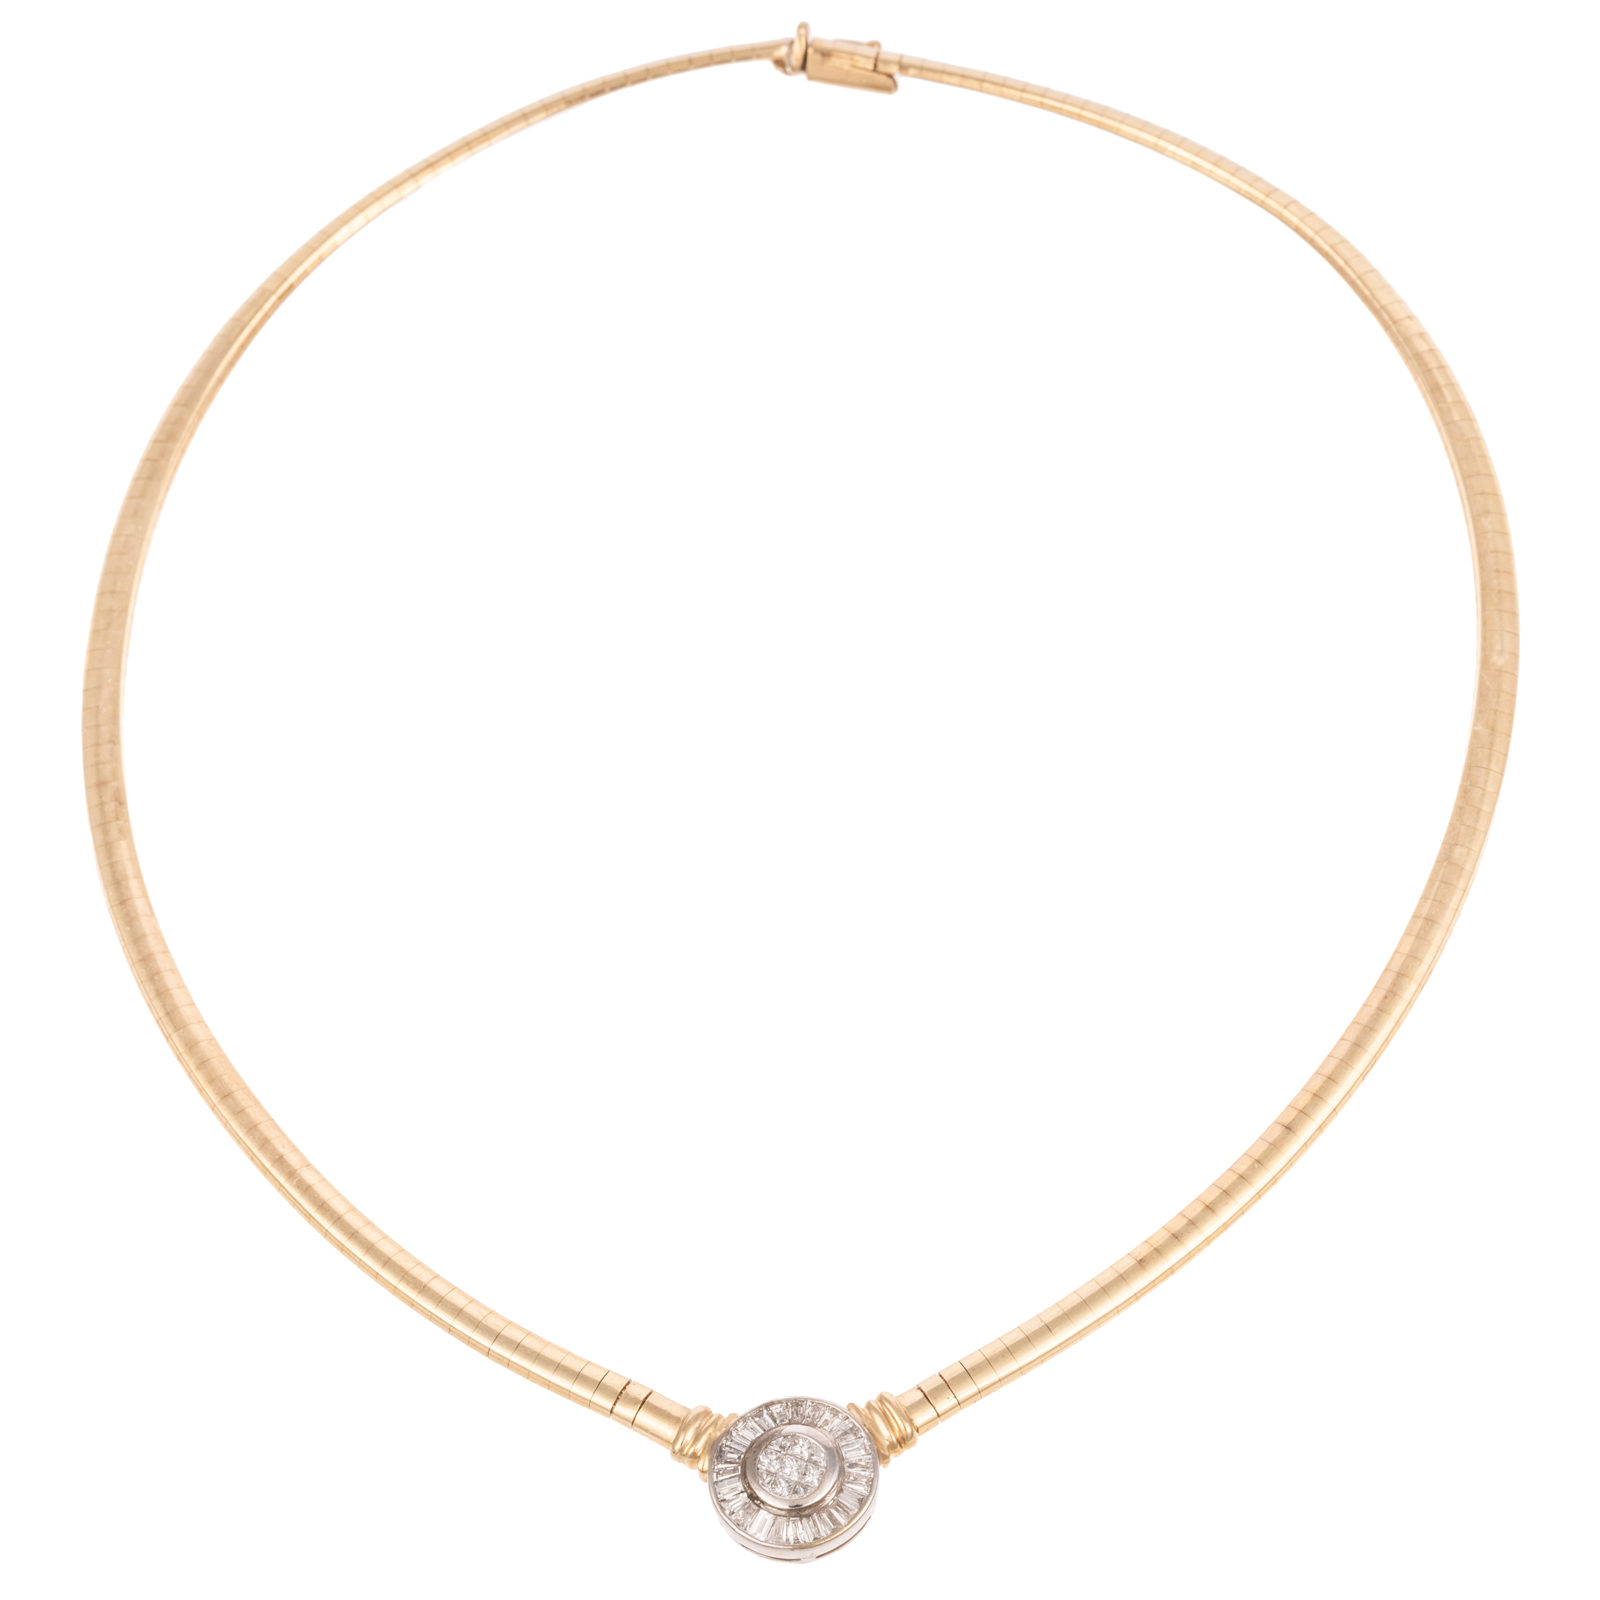 A DIAMOND OMEGA NECKLACE IN 14K